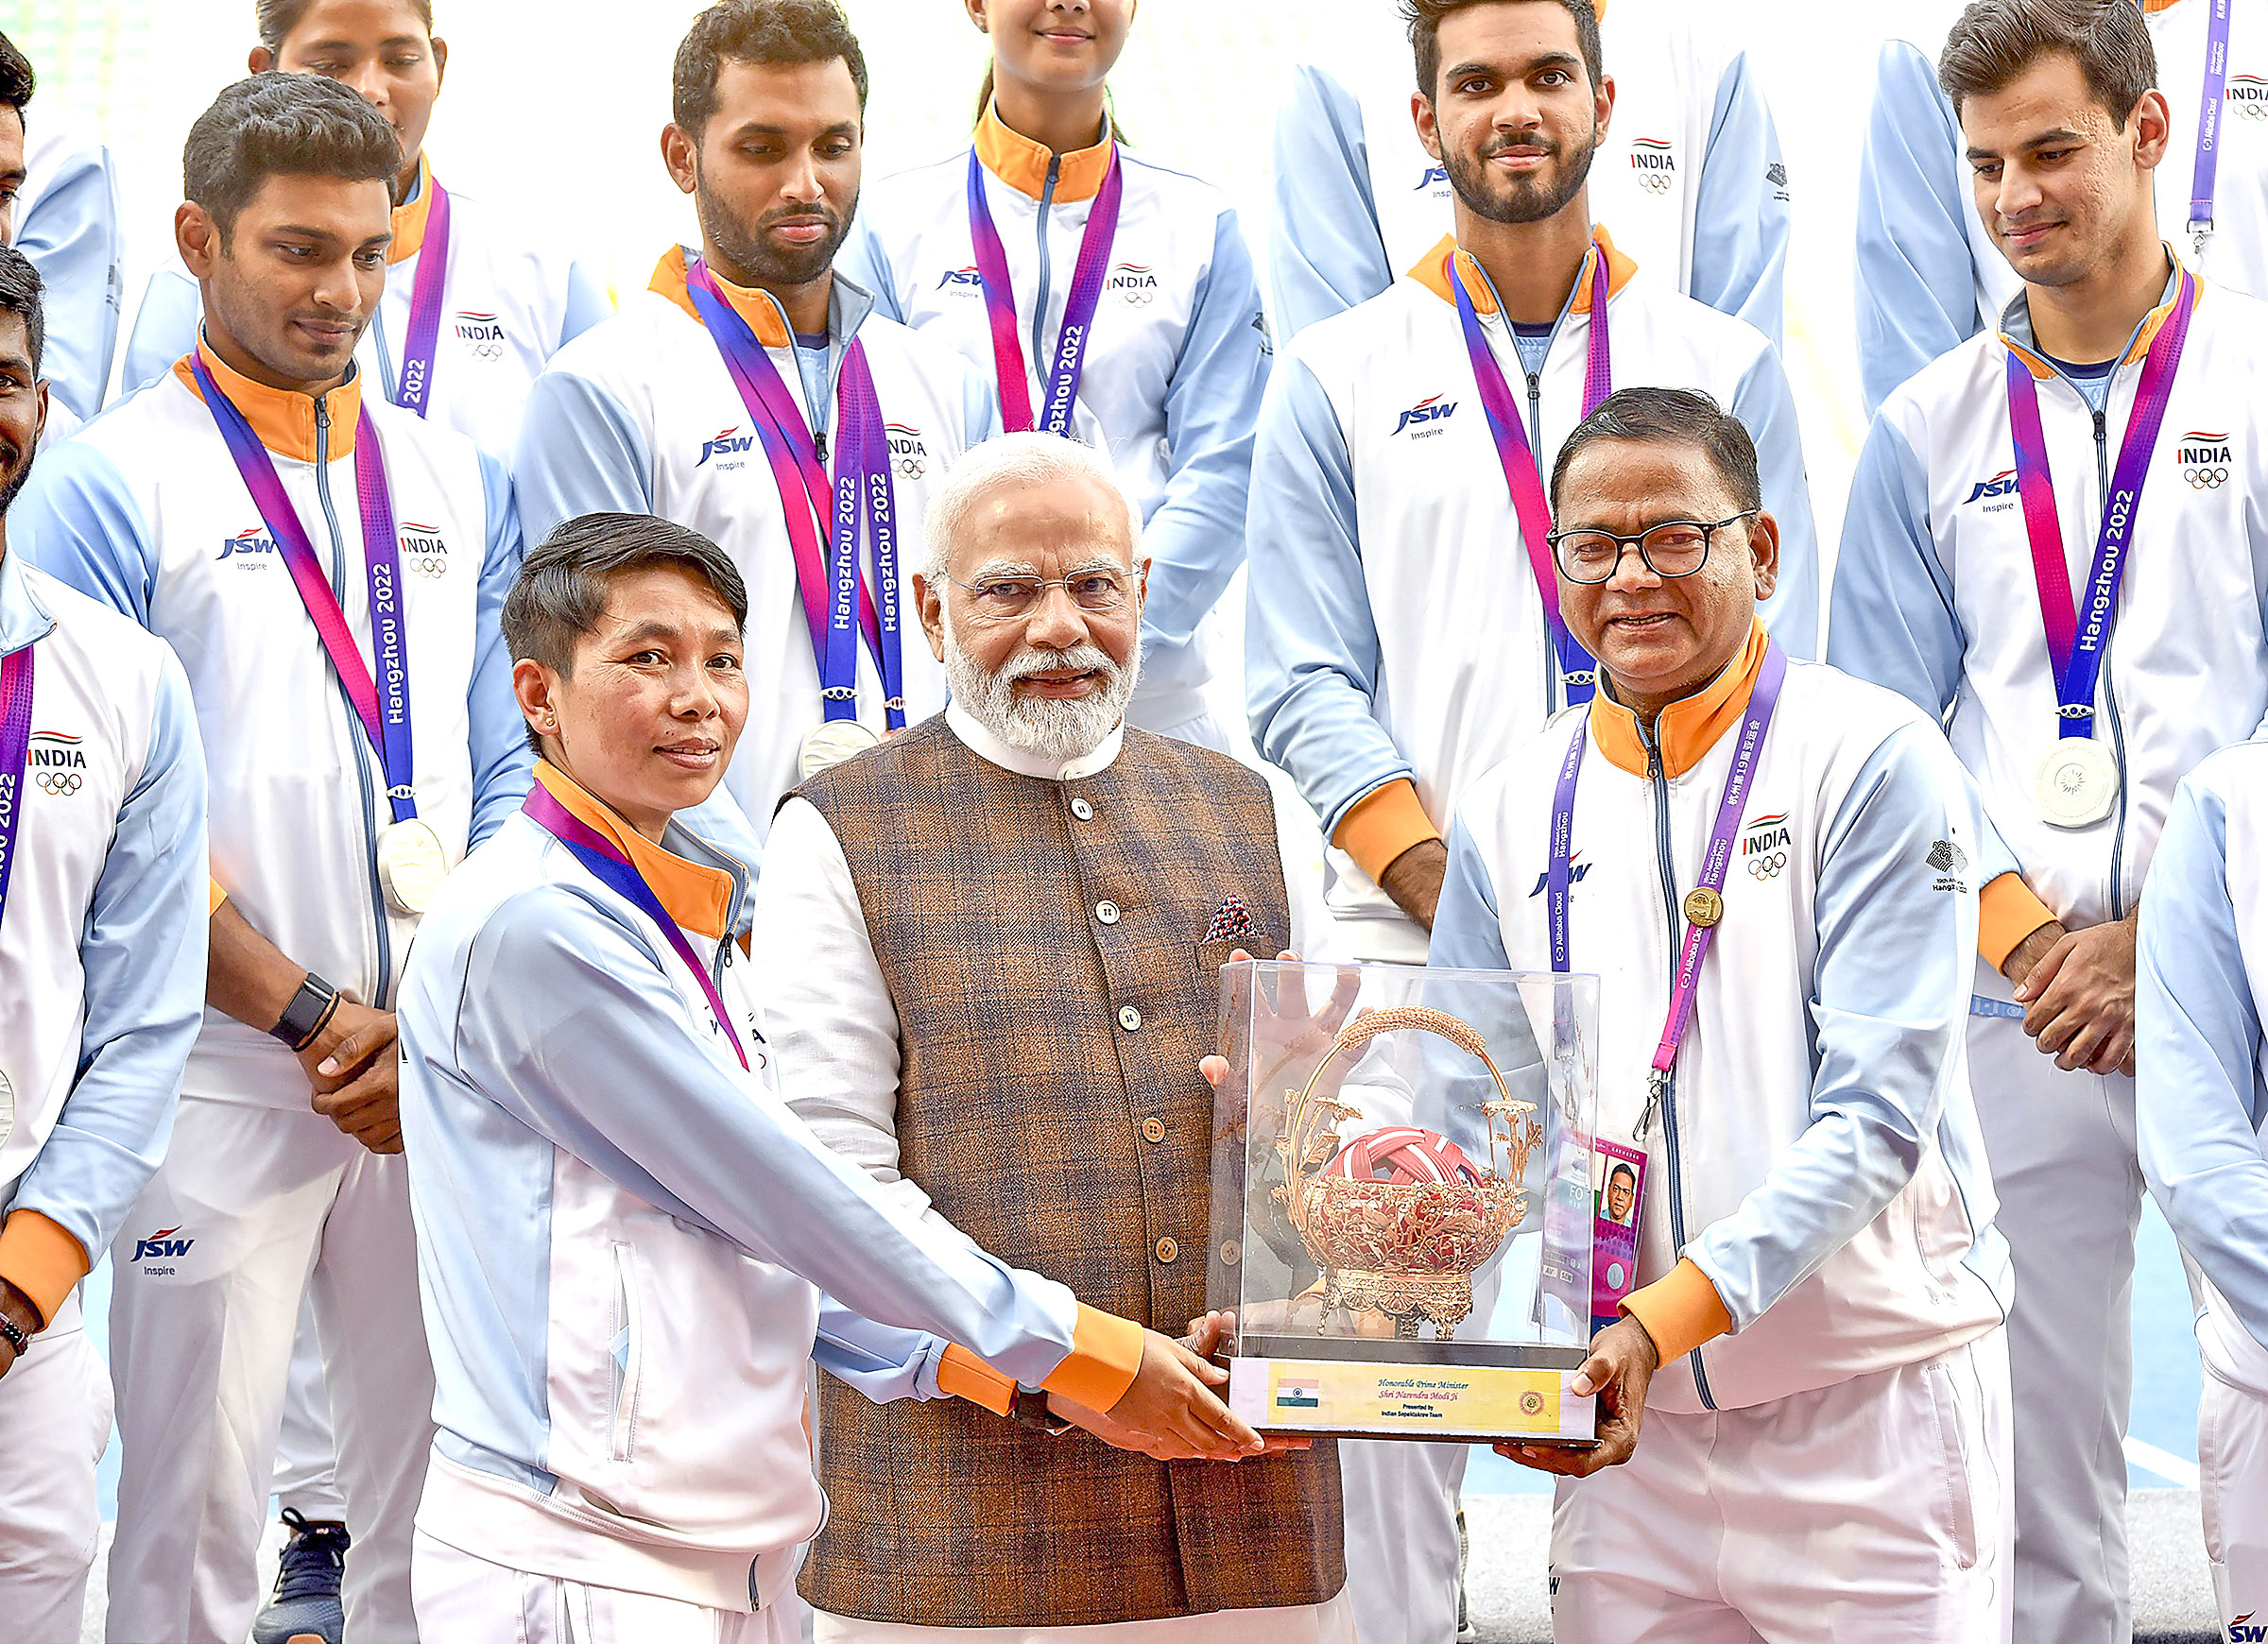 PM Modi being greeted by players and coach.